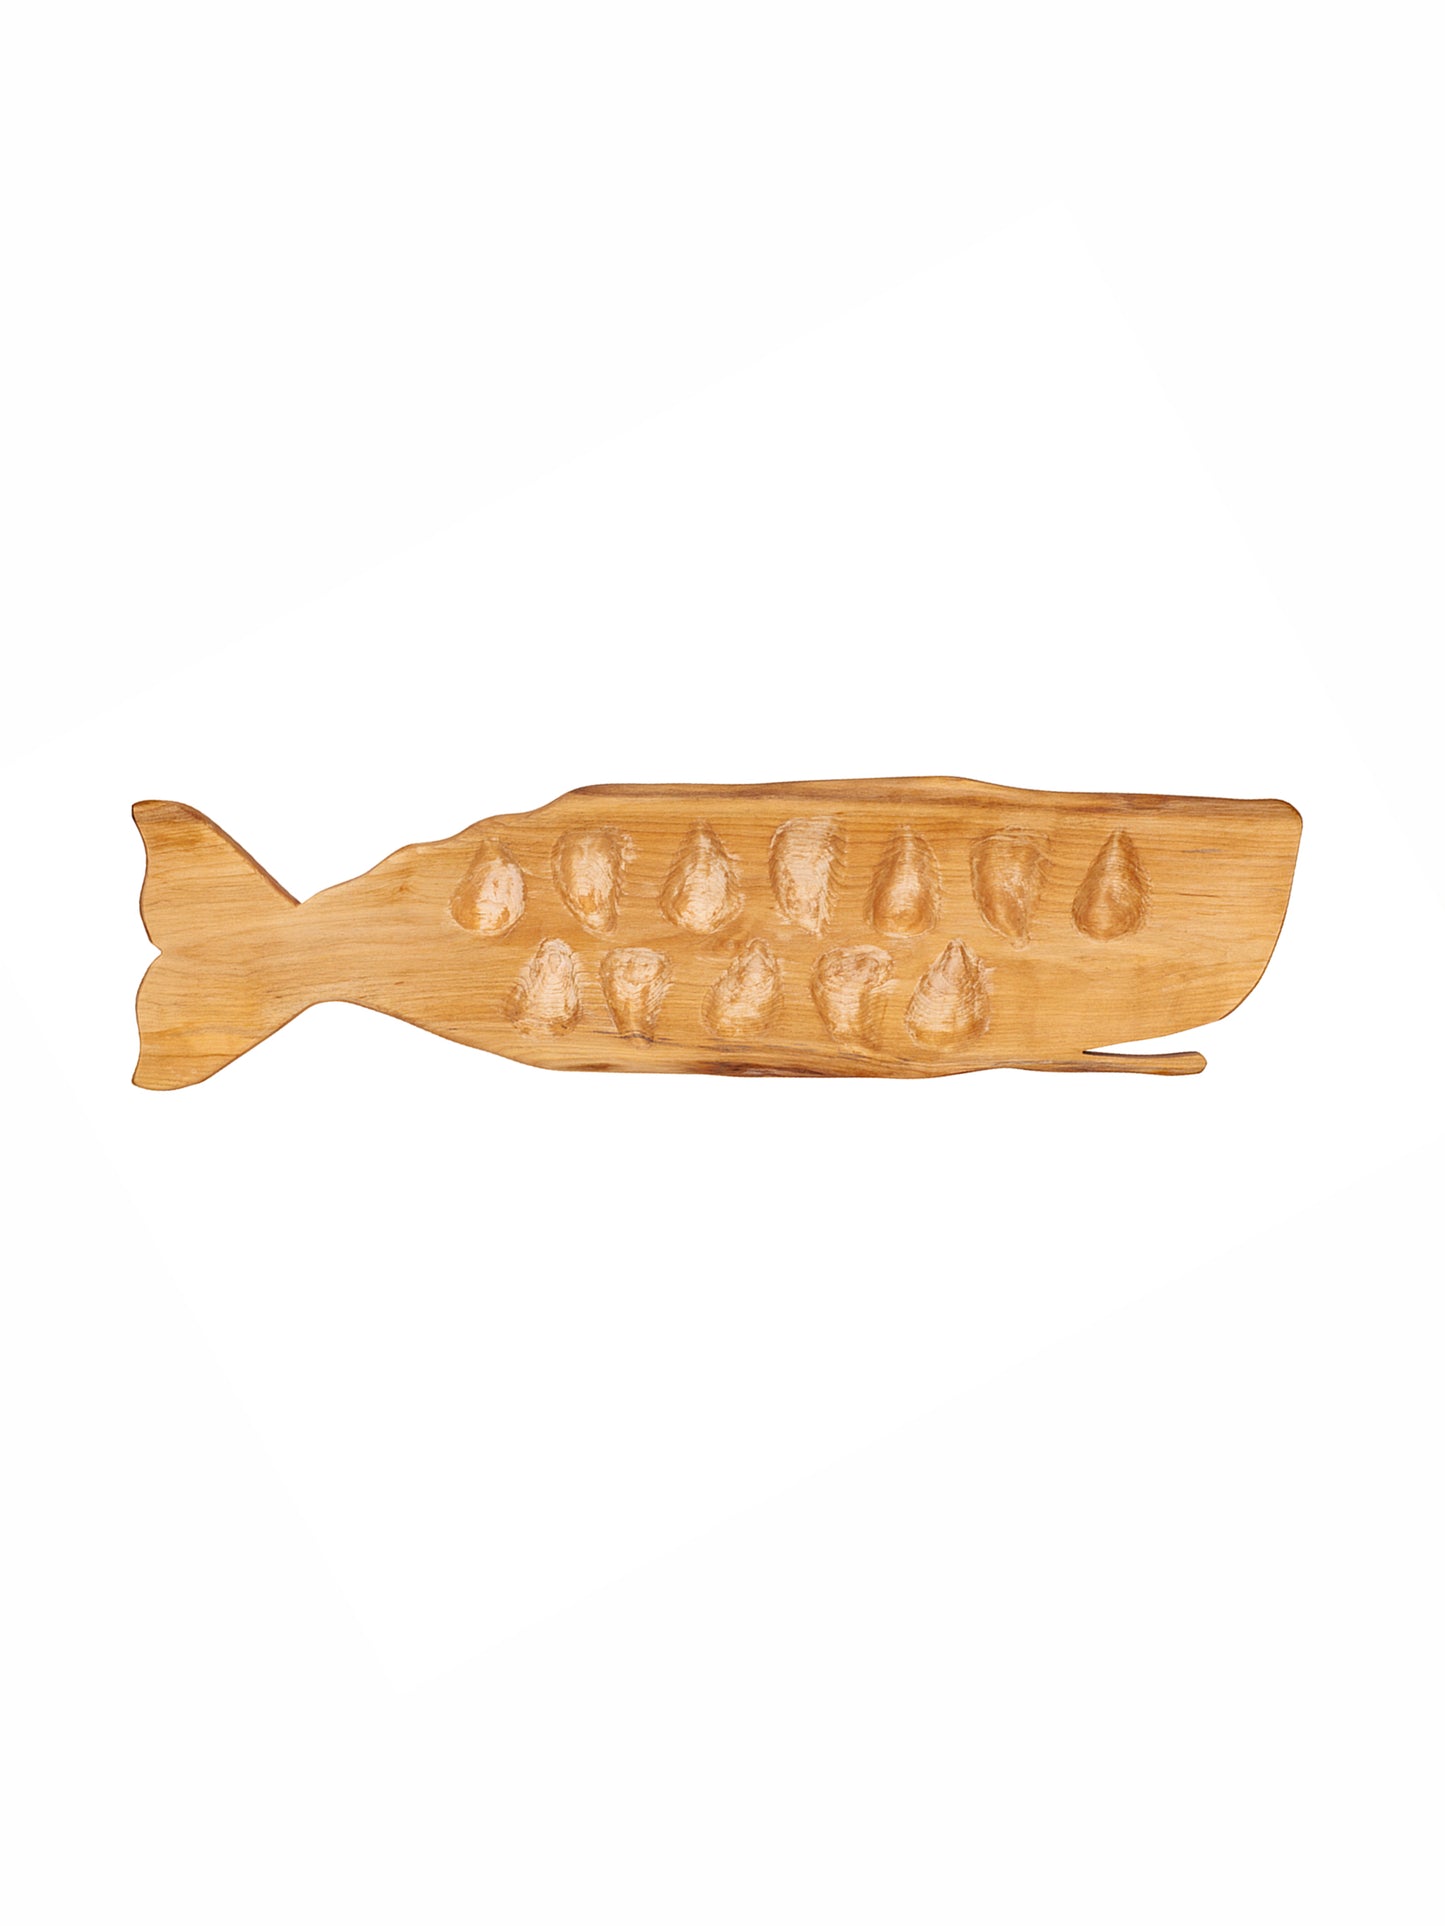 Nantucket Whale Oyster Serving Board Six Weston Table